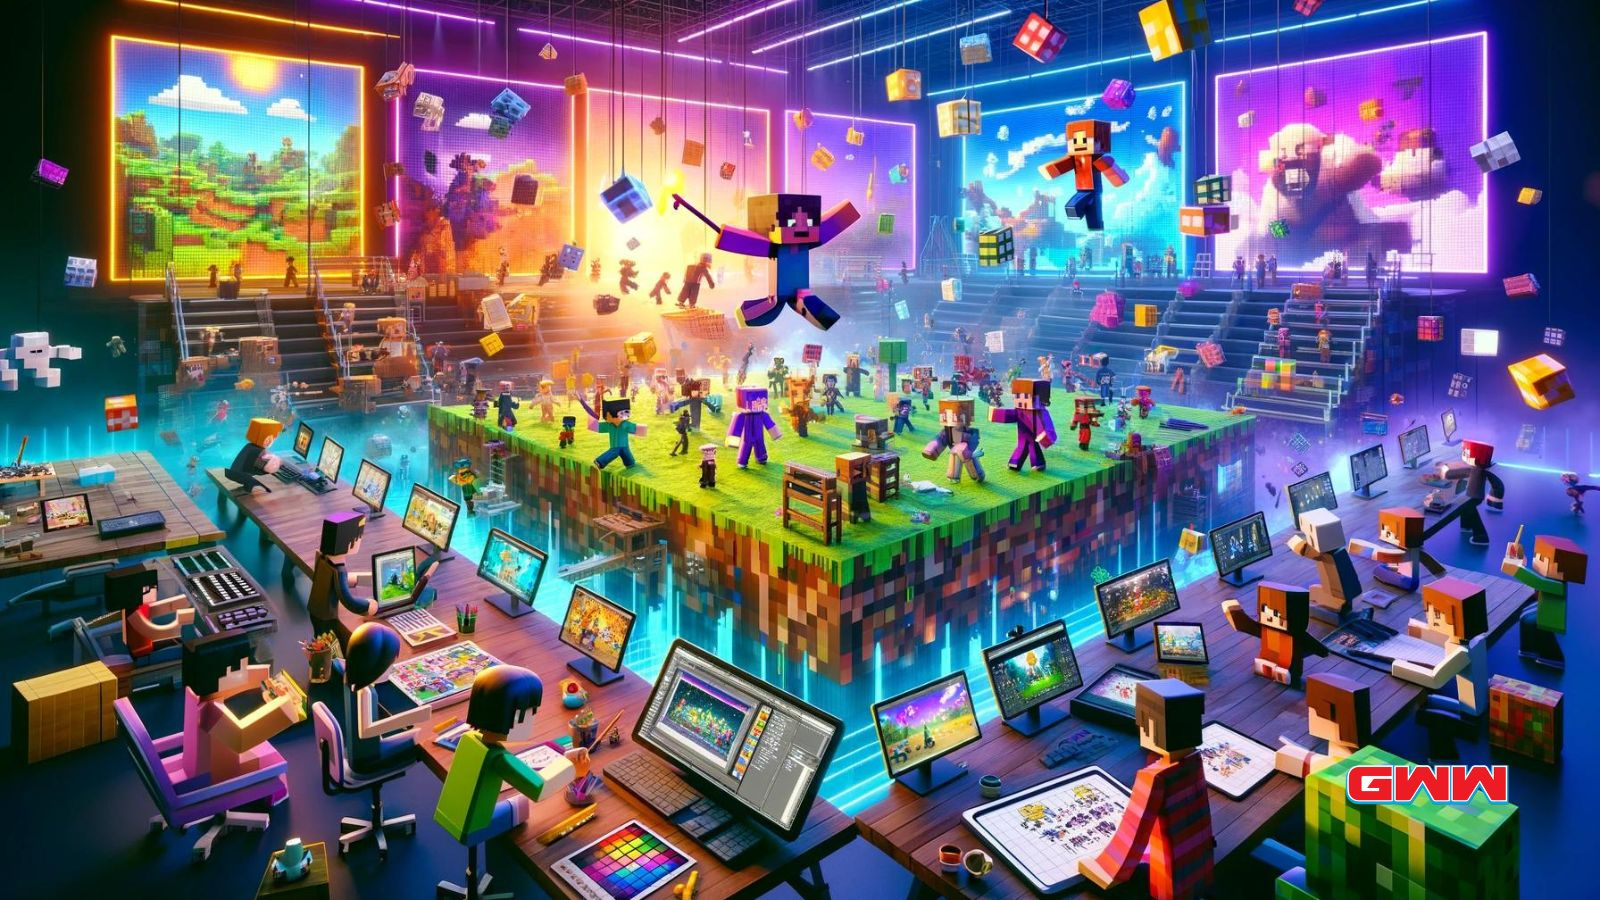 A vibrant scene showing the process of creating animation within a Minecraft-inspired virtual world. 